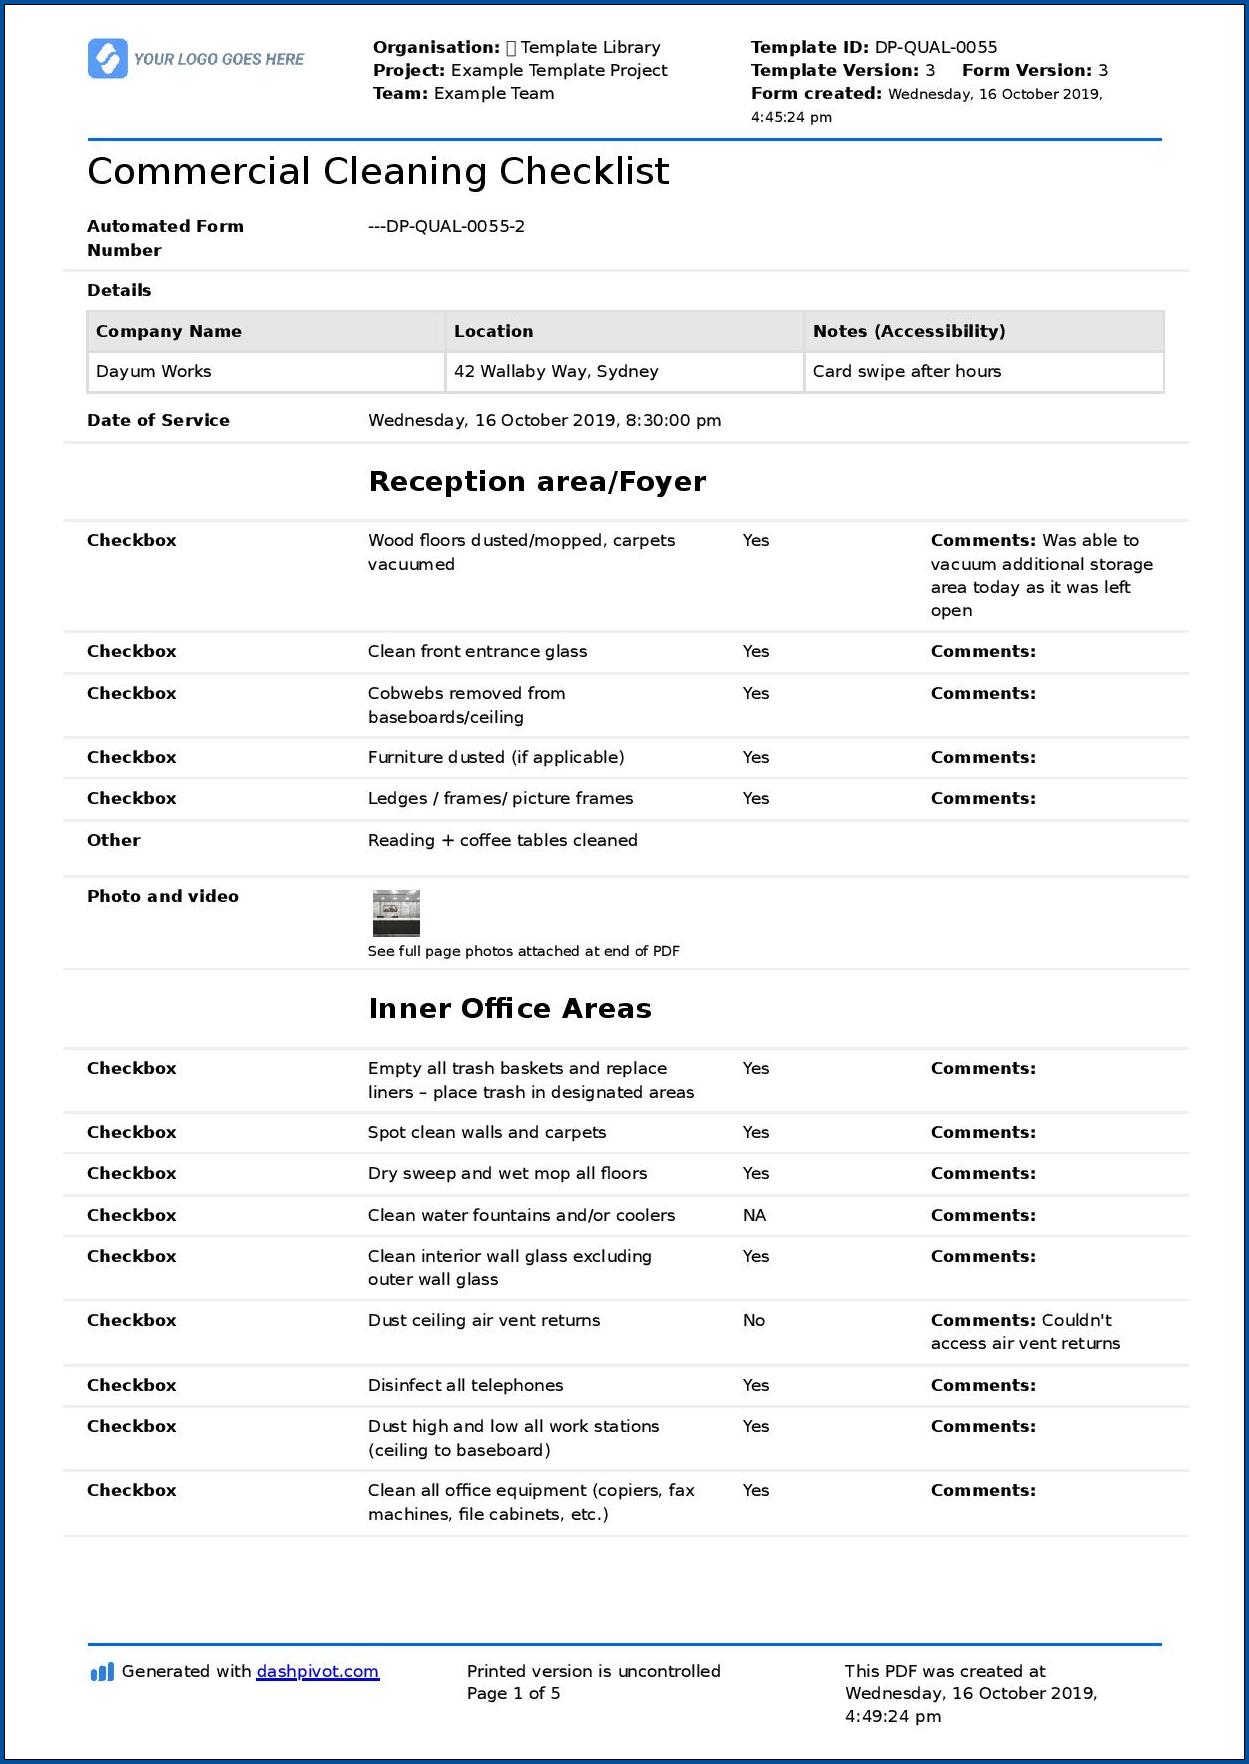 Example of Cleaning Checklist Template